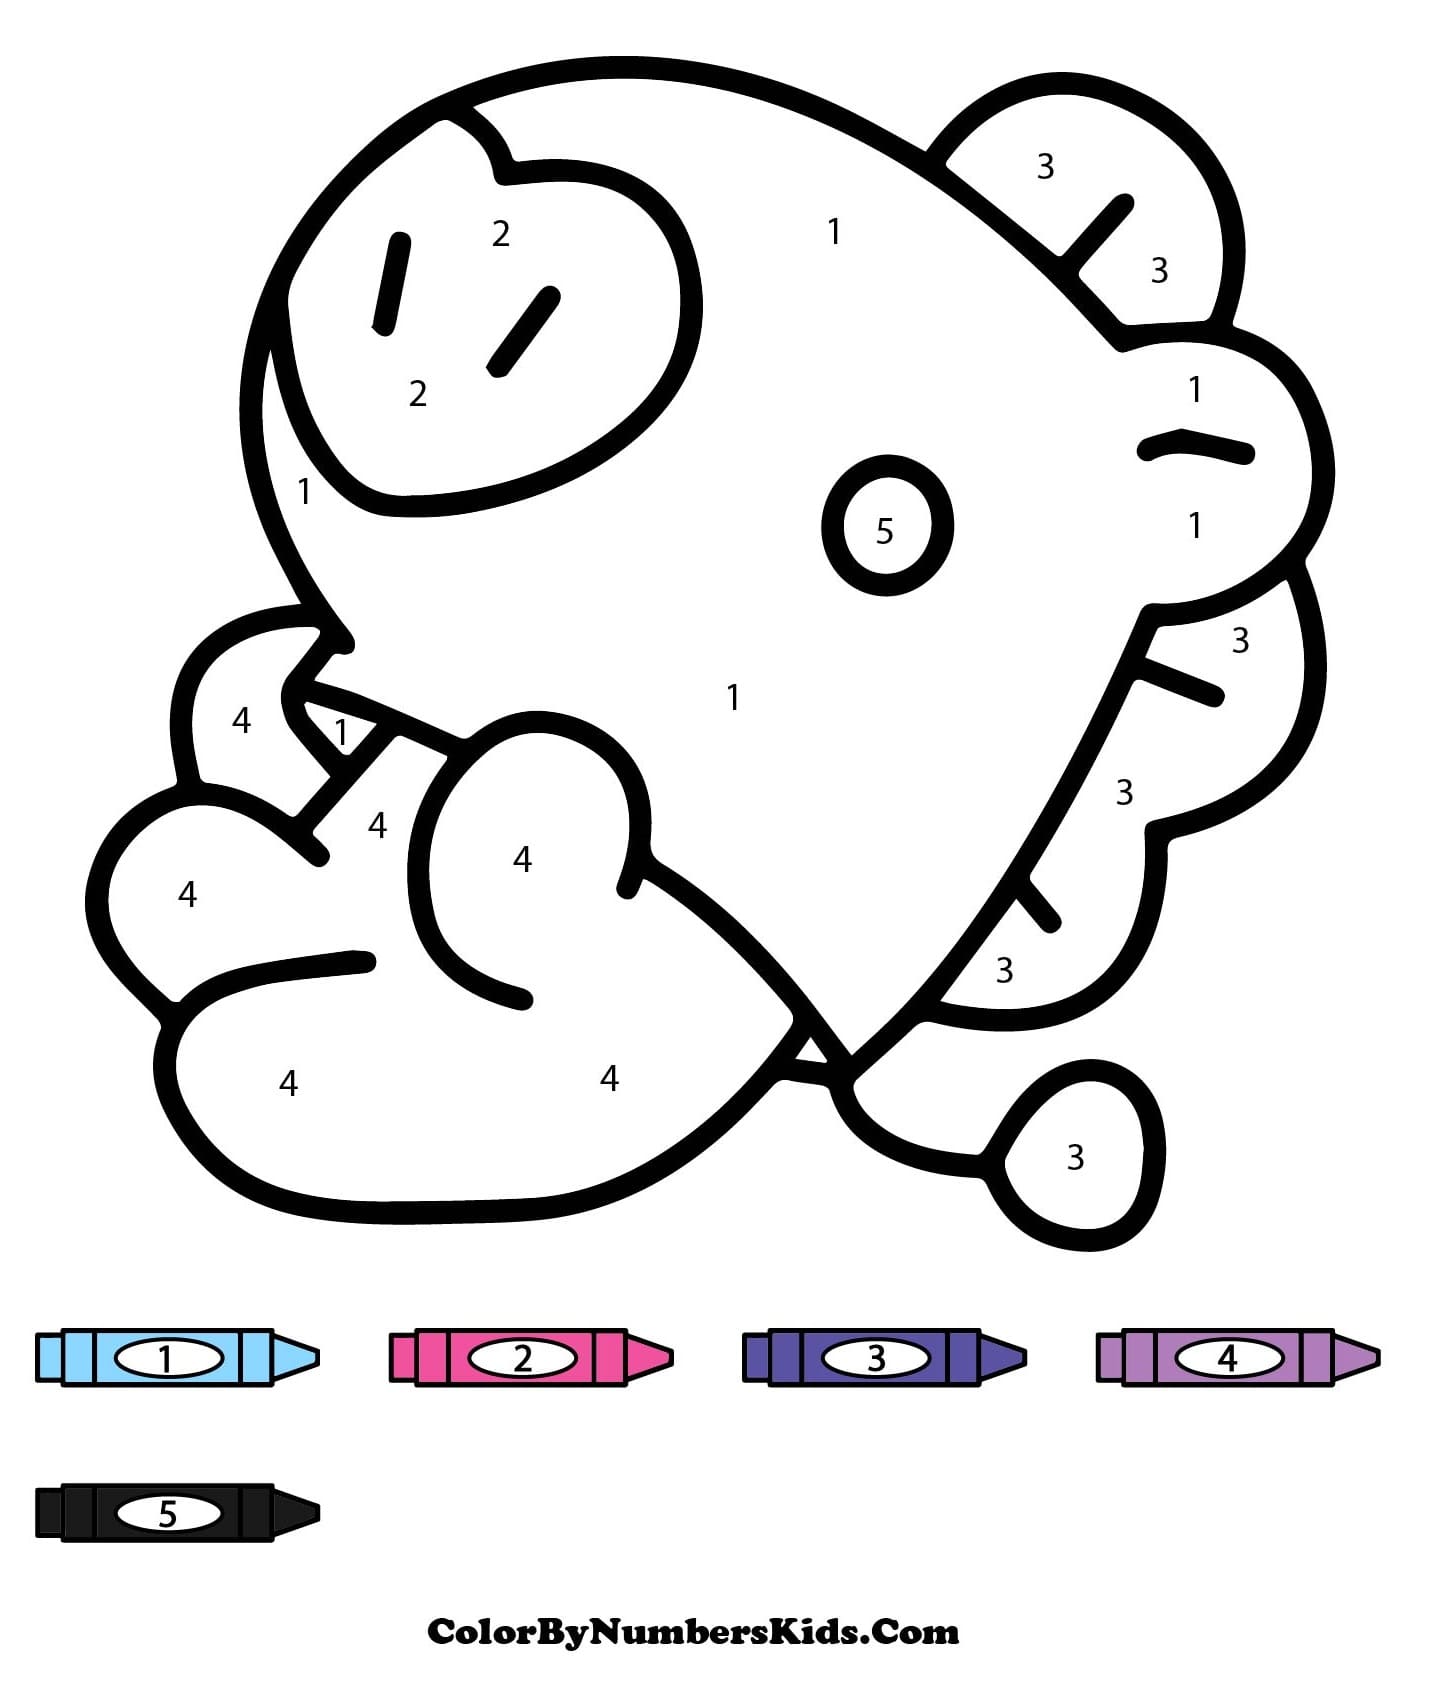 Mang in BT21 Color By Number